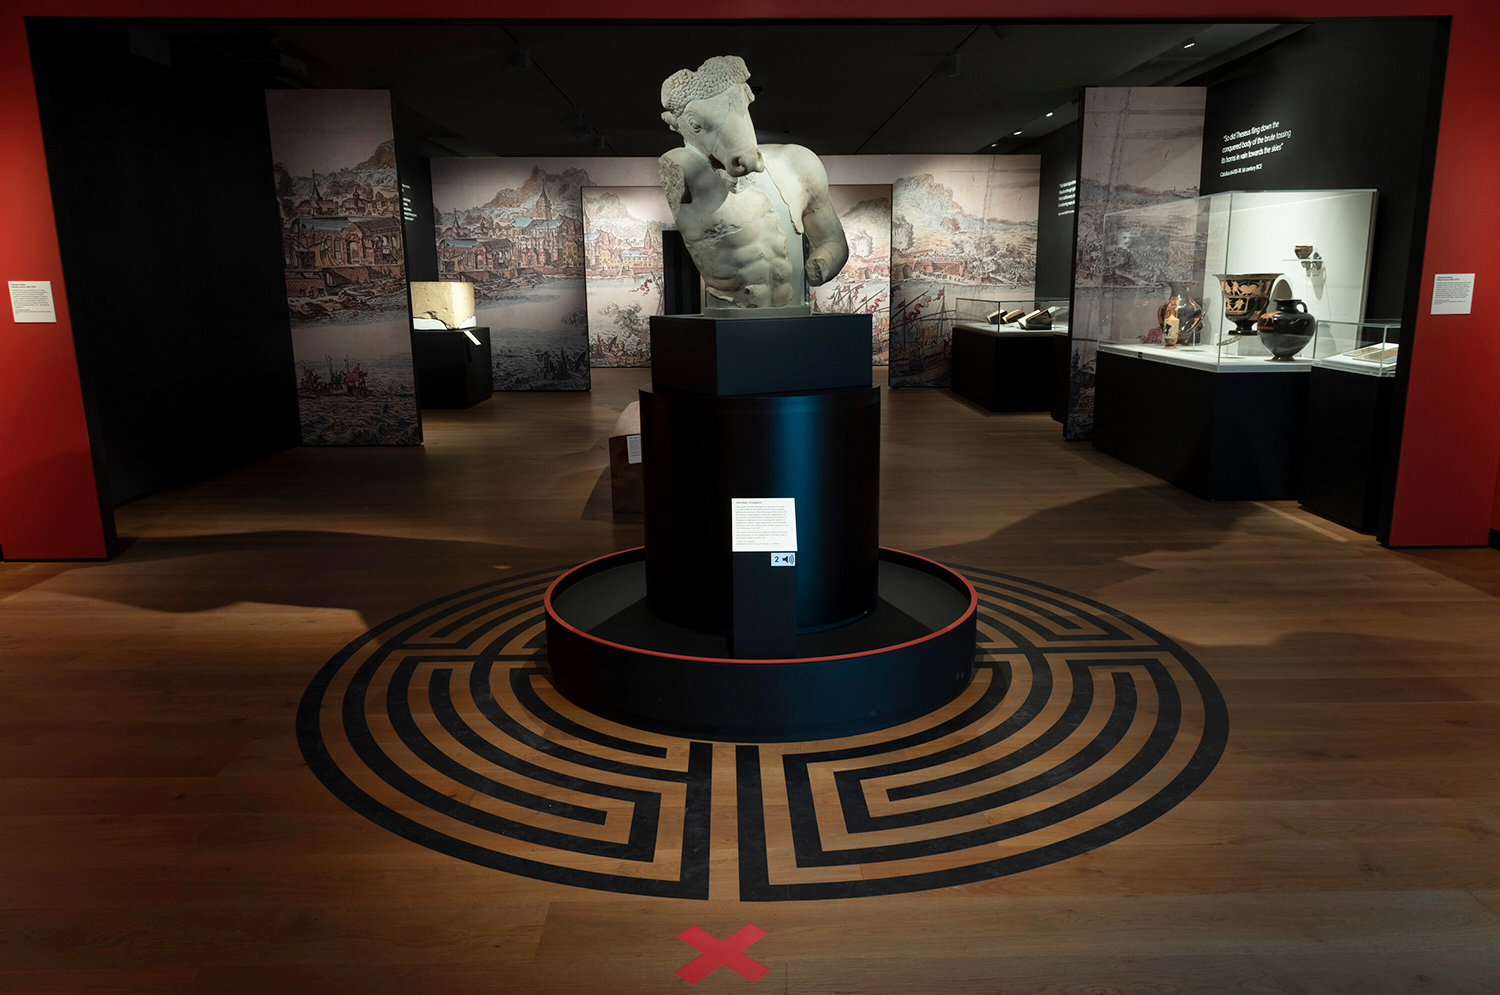 The opening gallery scene inside the Labyrinth exhibition showing the striking white marble Minotaur statue